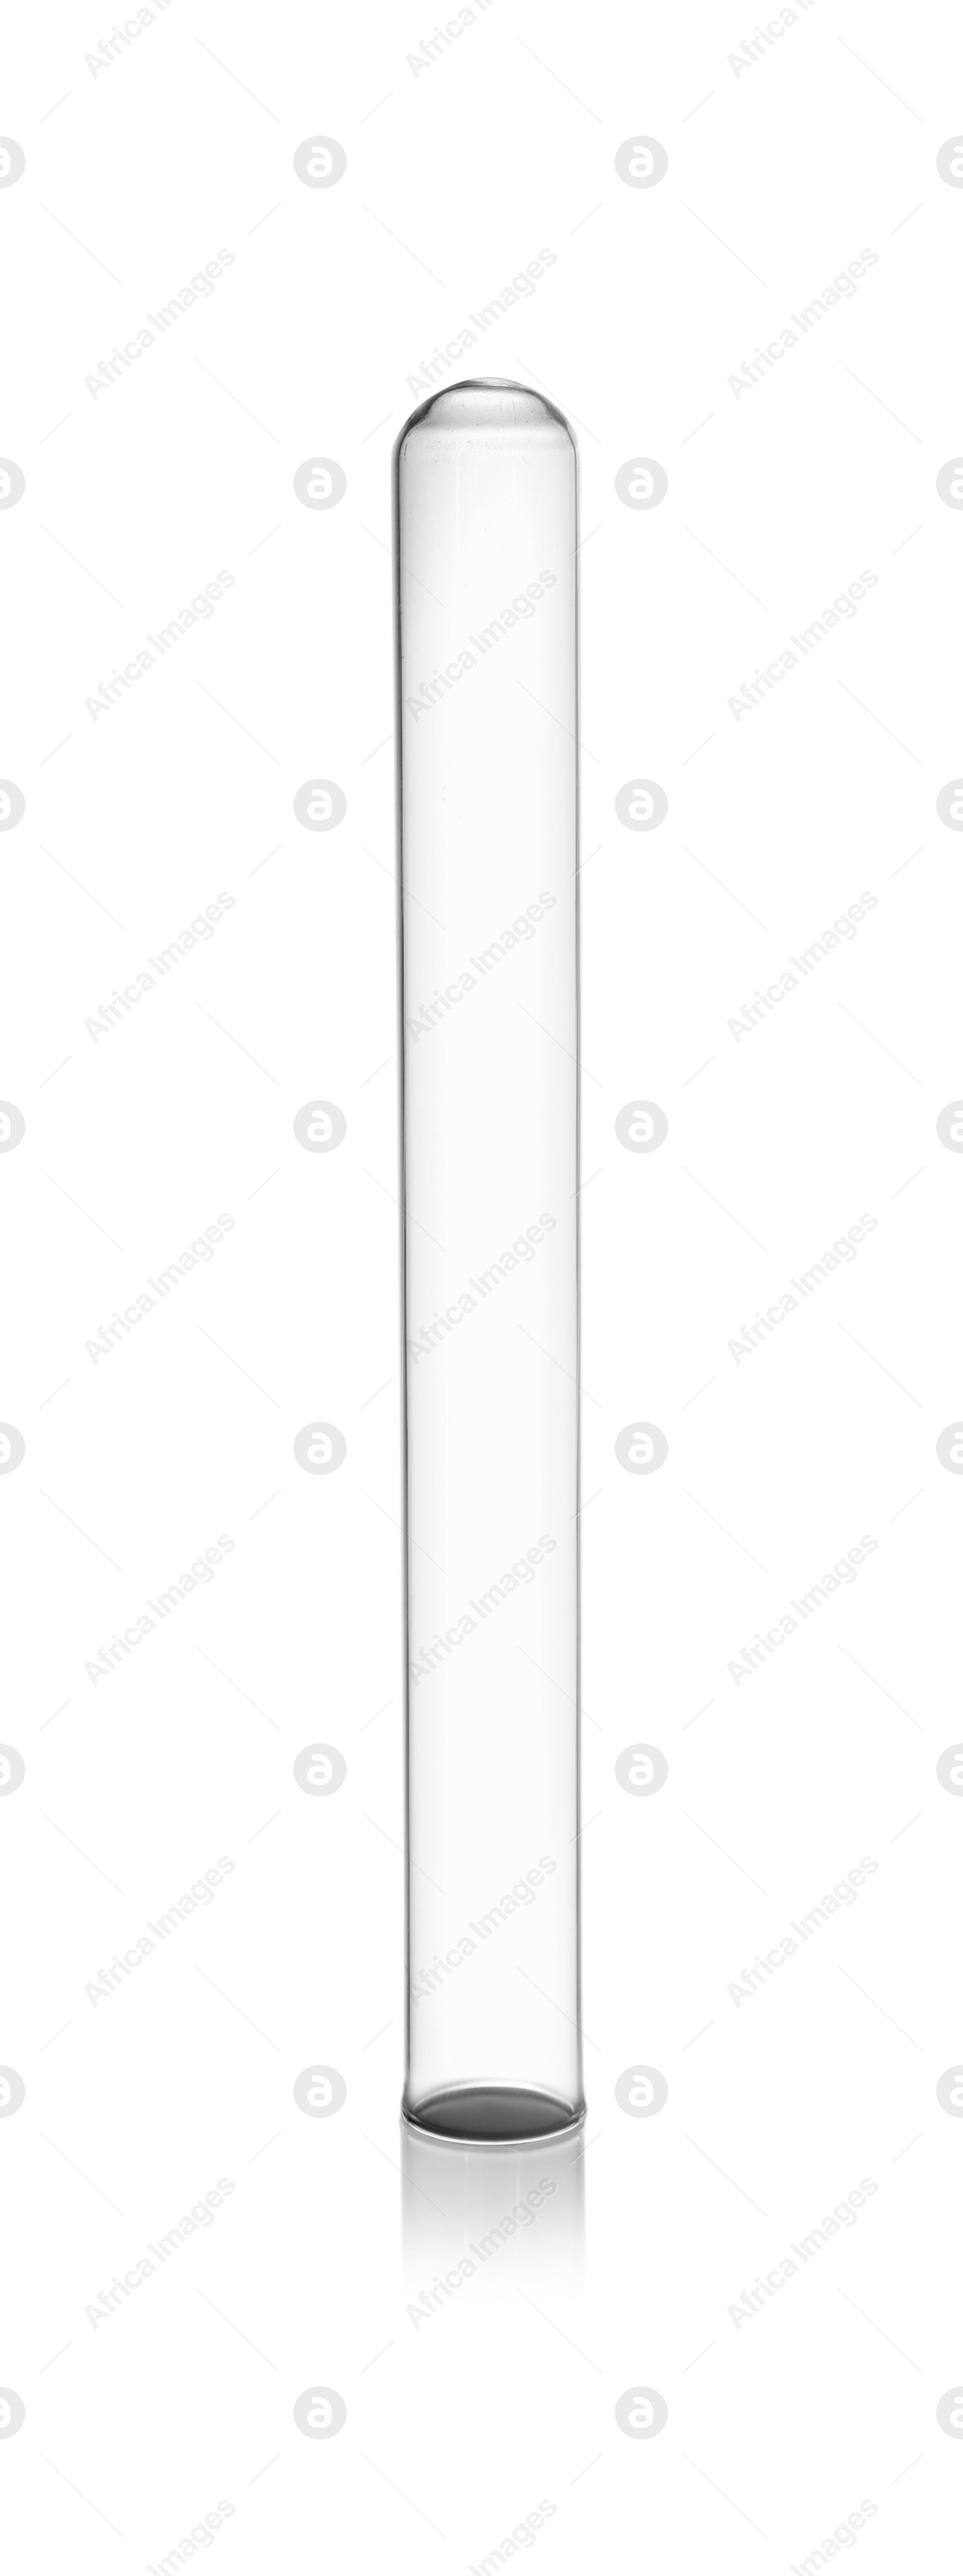 Photo of Empty glass test tube isolated on white